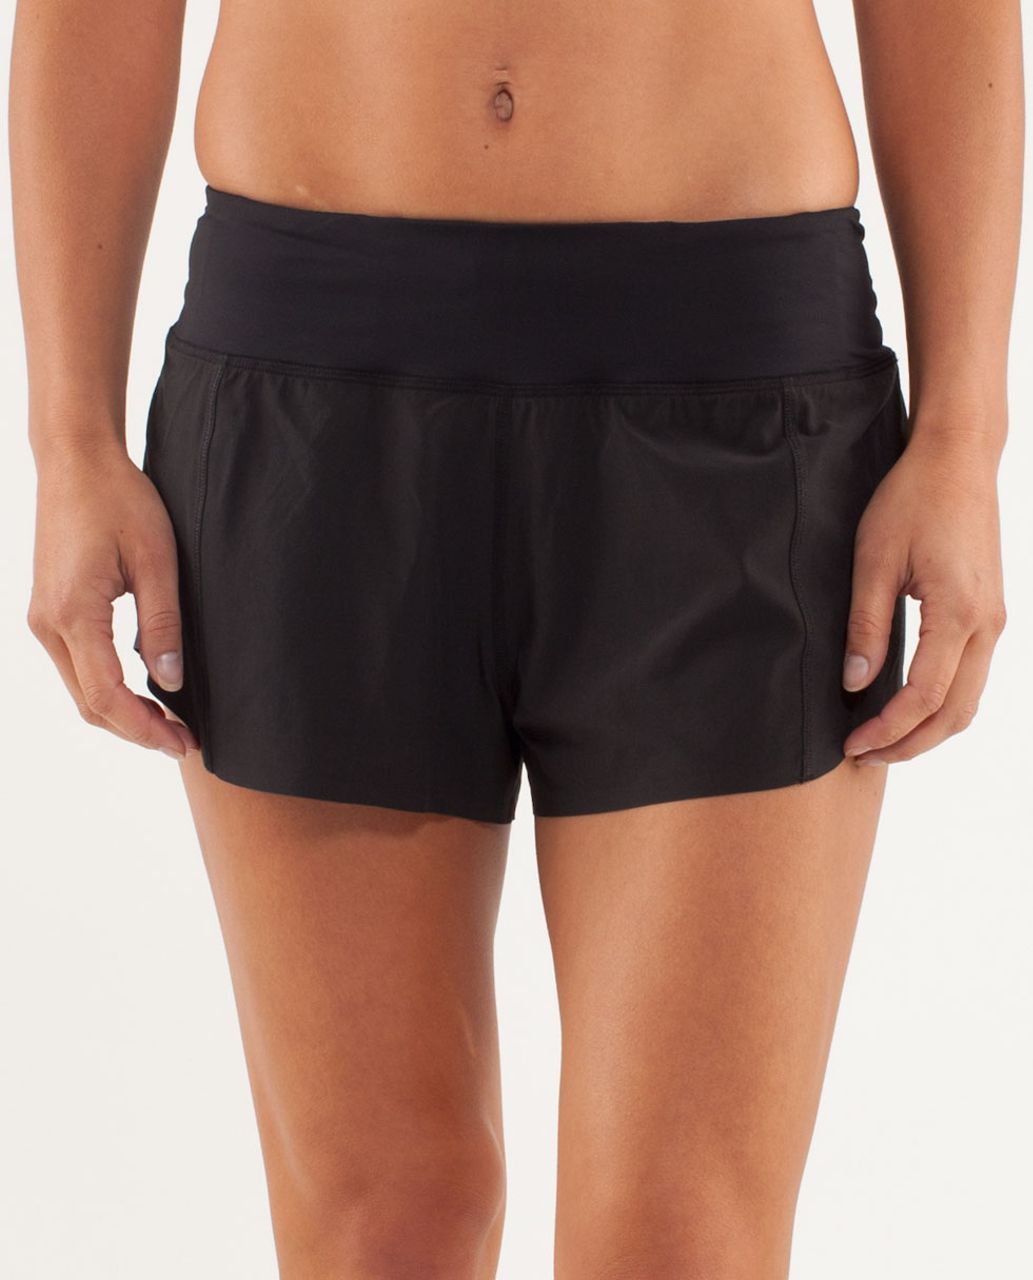 Lululemon Tracker Shorts review: My favorite shorts for running outside -  Reviewed